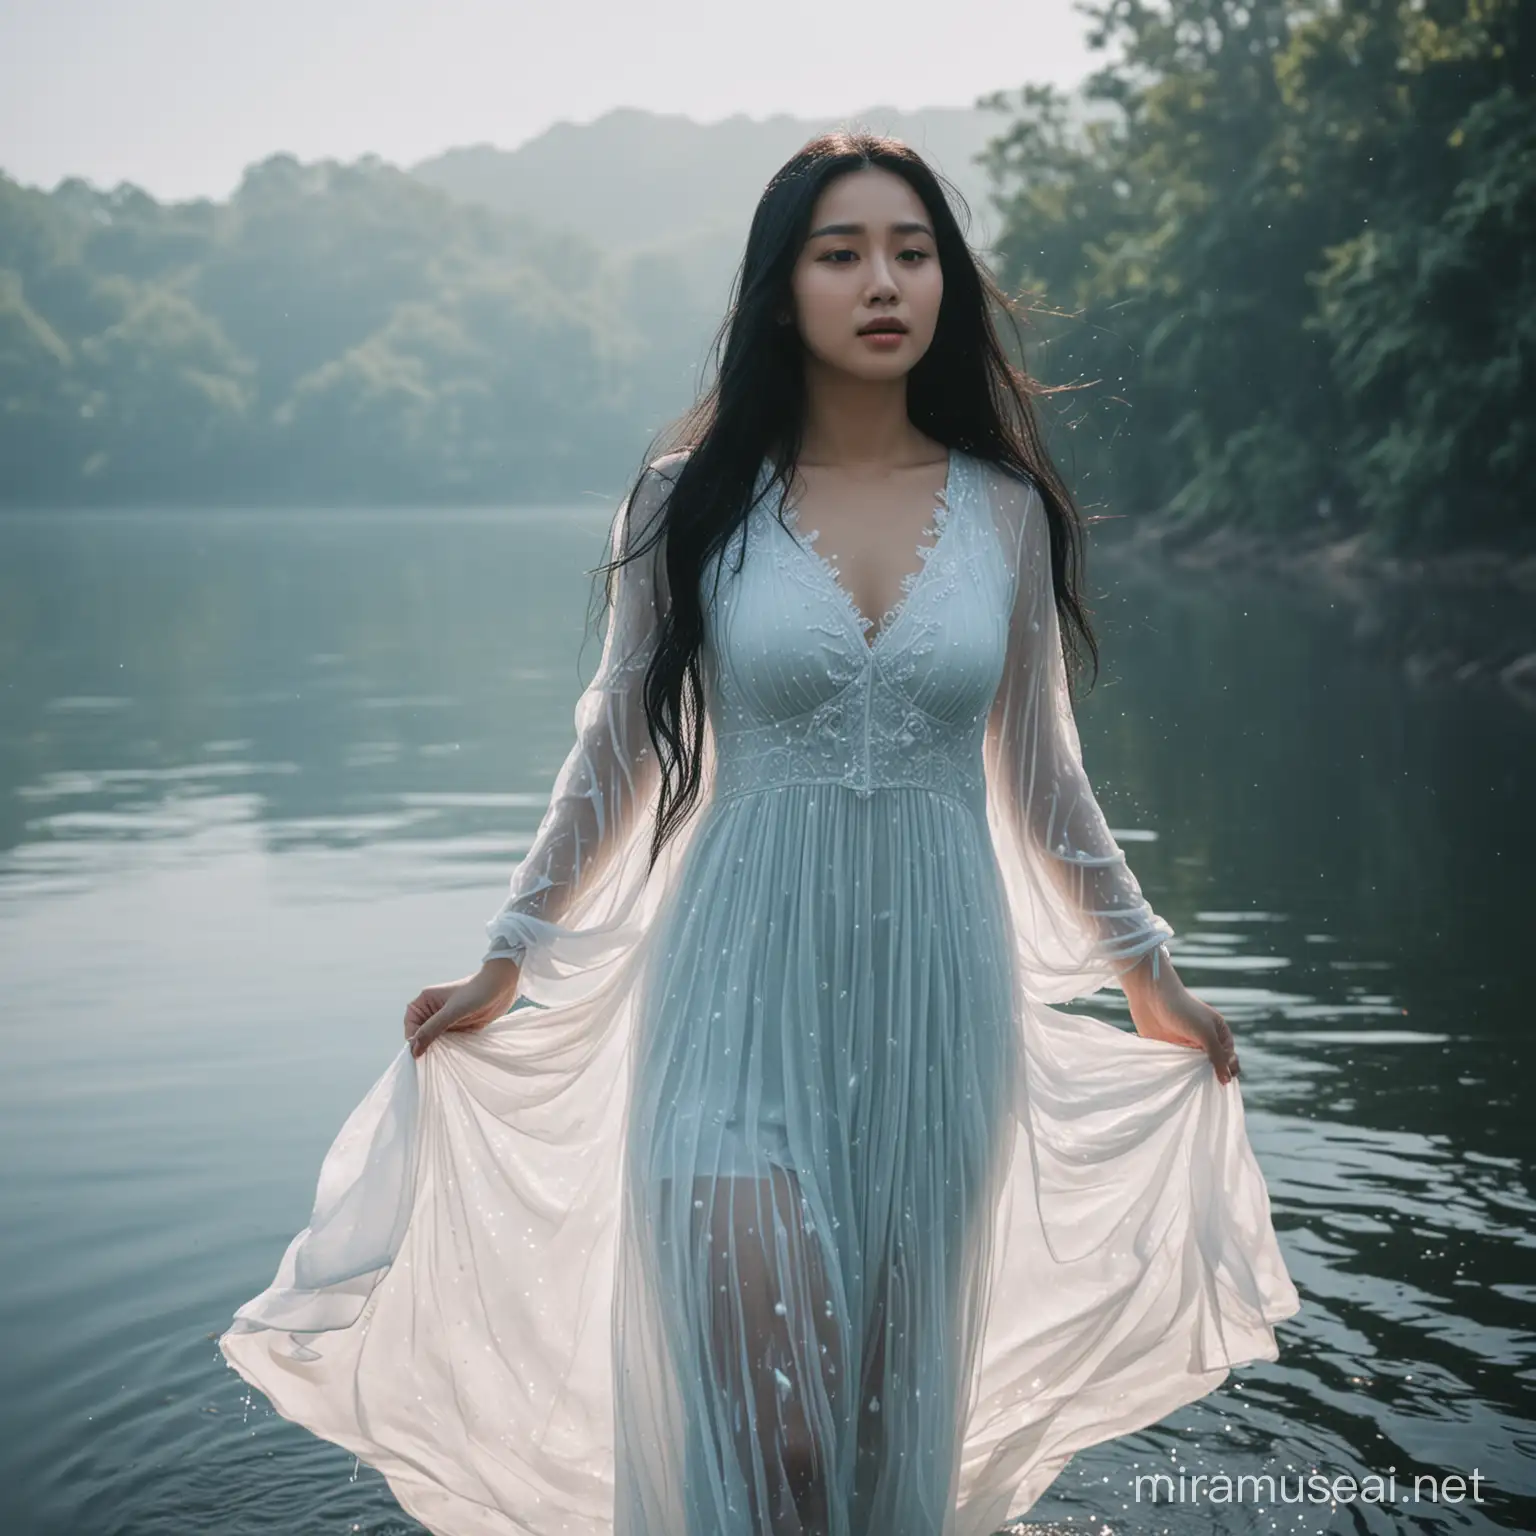 a spell that lifts a blob of water from the lake, a 22 years old girl, Singaporean Facial Features, Long Black Hair, Mesmerized expression, bluish-white gradient dress, mystical, side angle